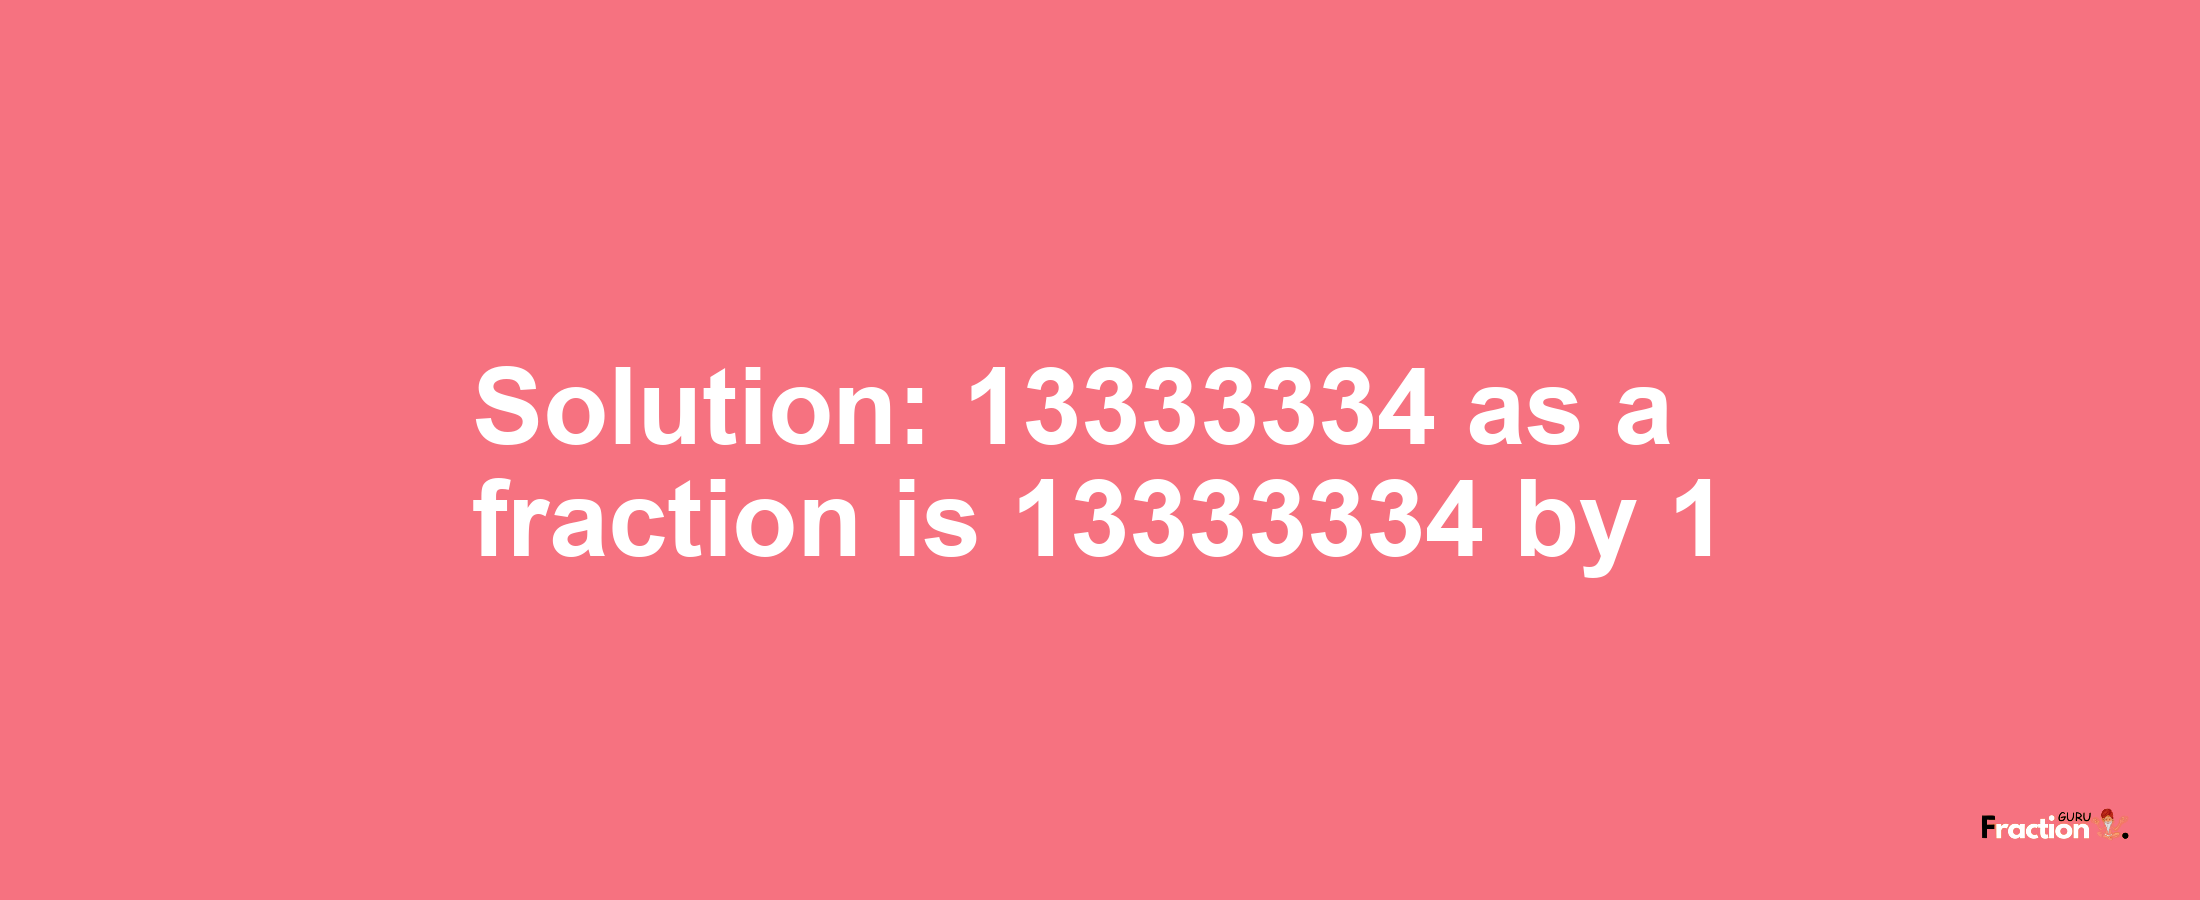 Solution:13333334 as a fraction is 13333334/1